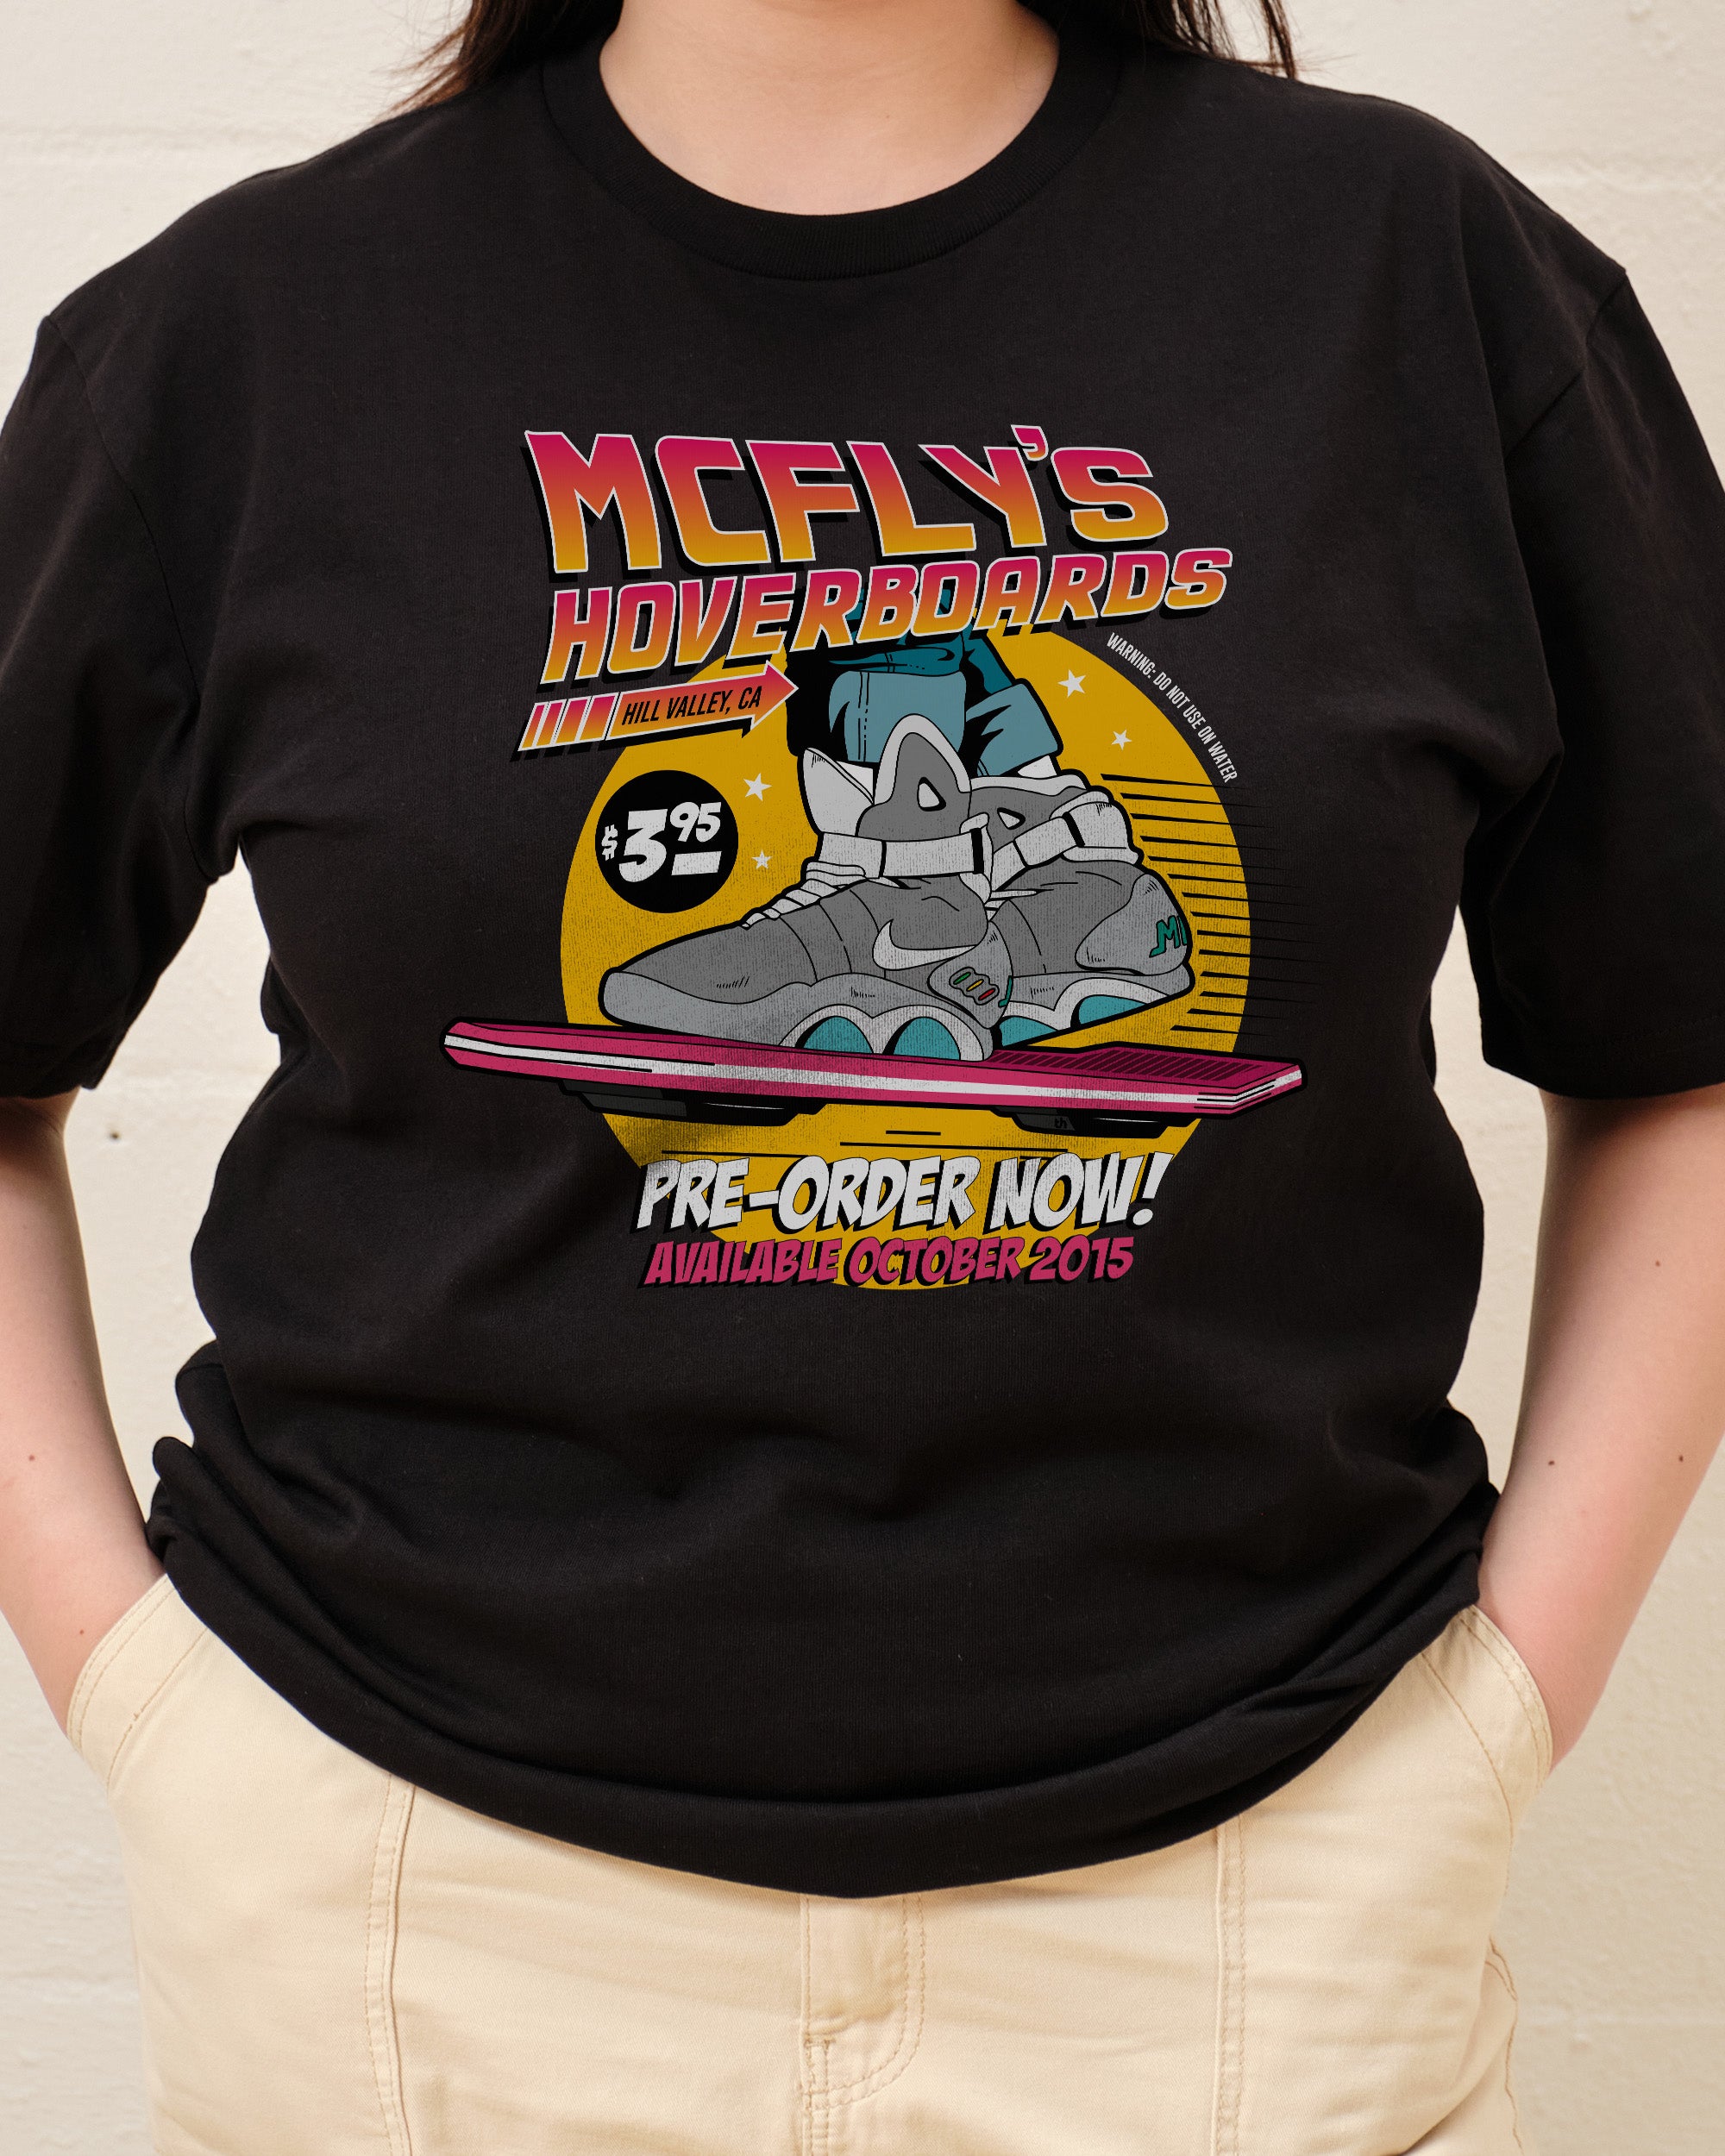 McFly's Hoverboards T-Shirt